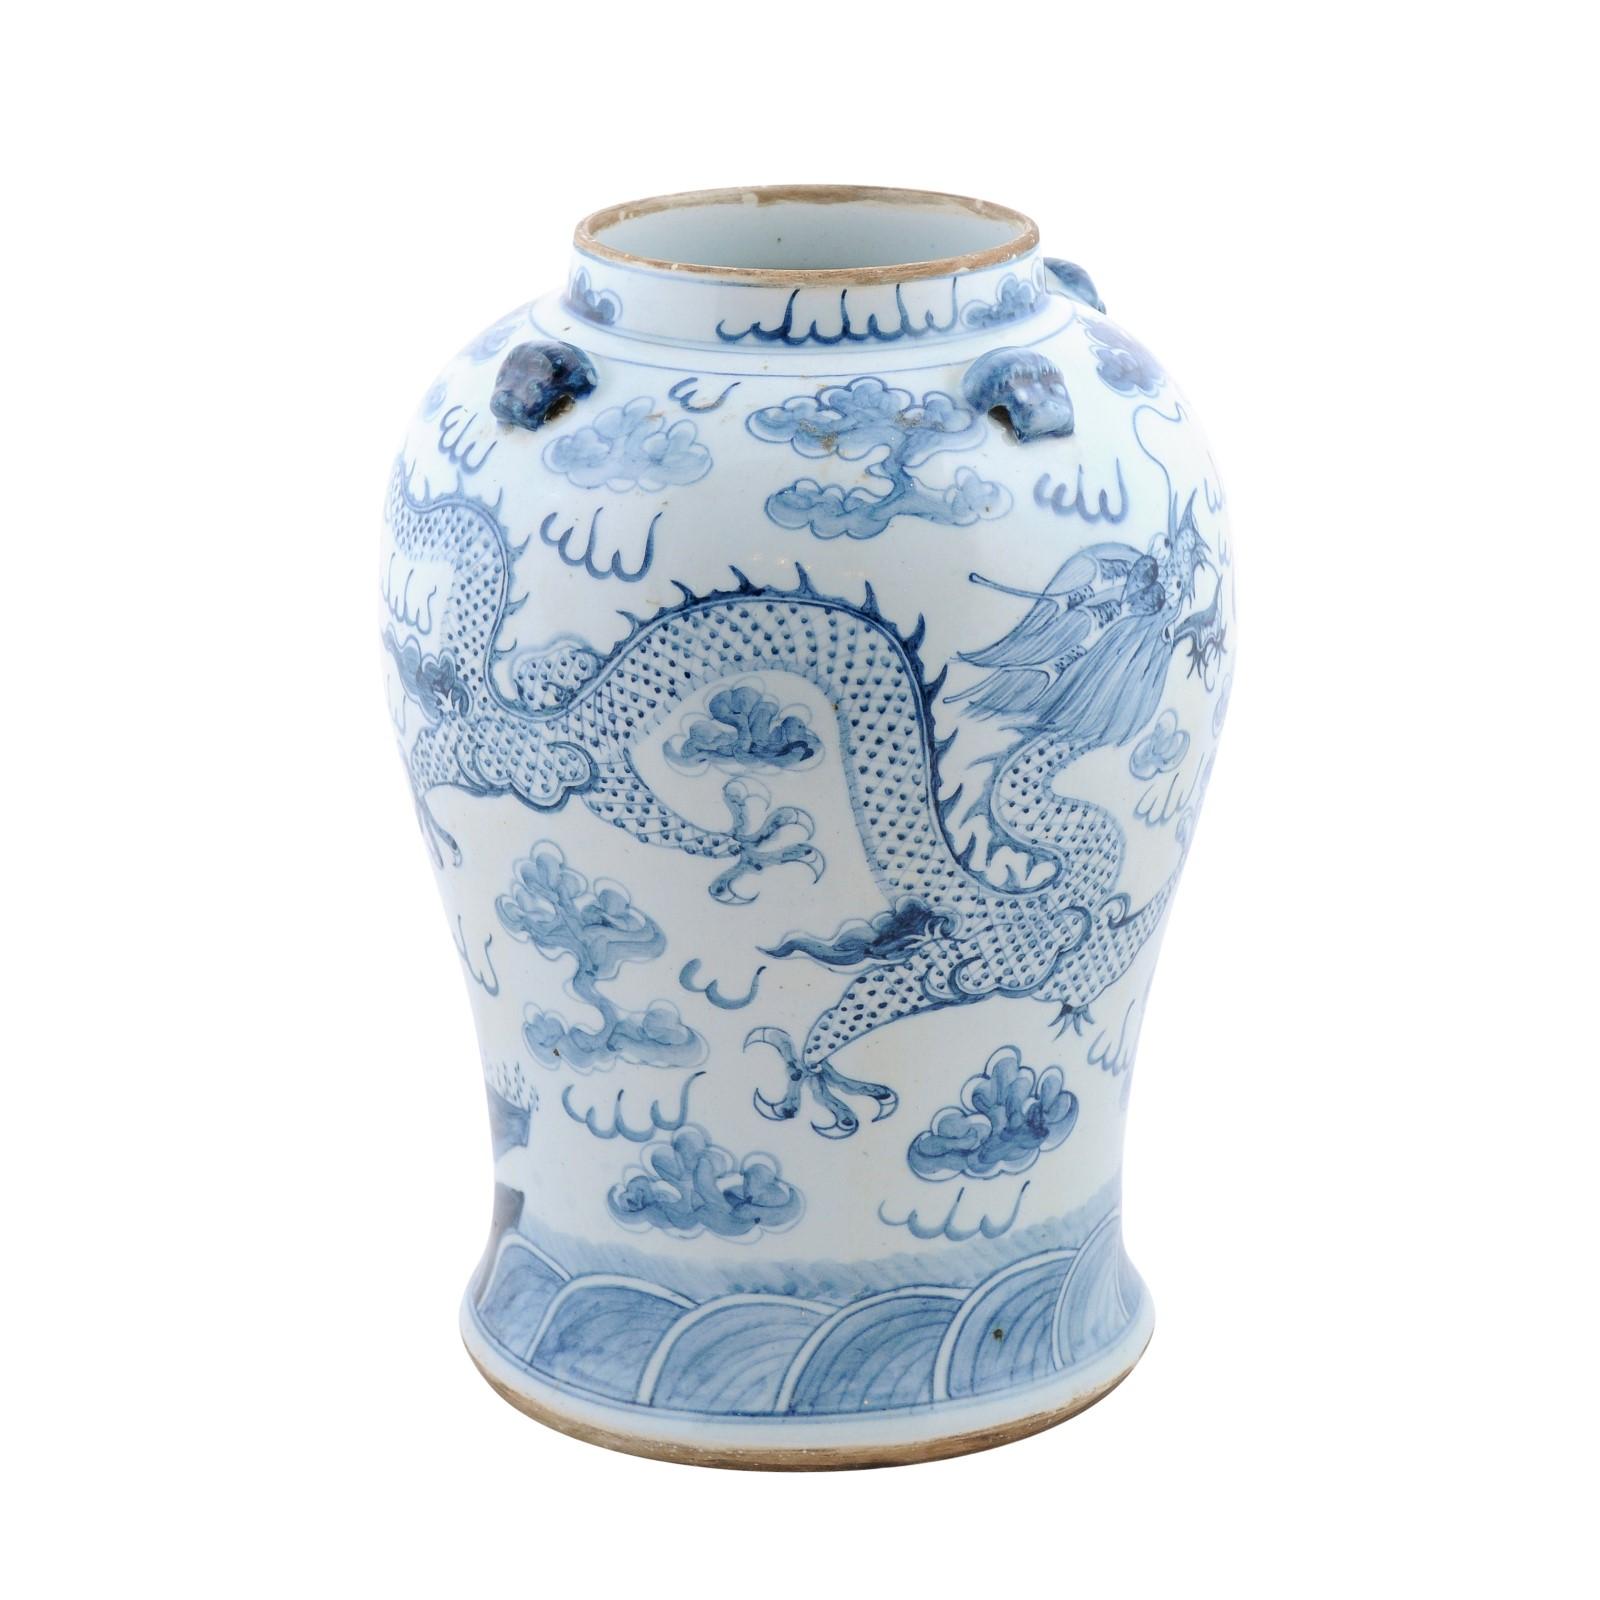 Chinese Export 20th Century Blue and White Porcelain Vase with Dragon Motifs For Sale